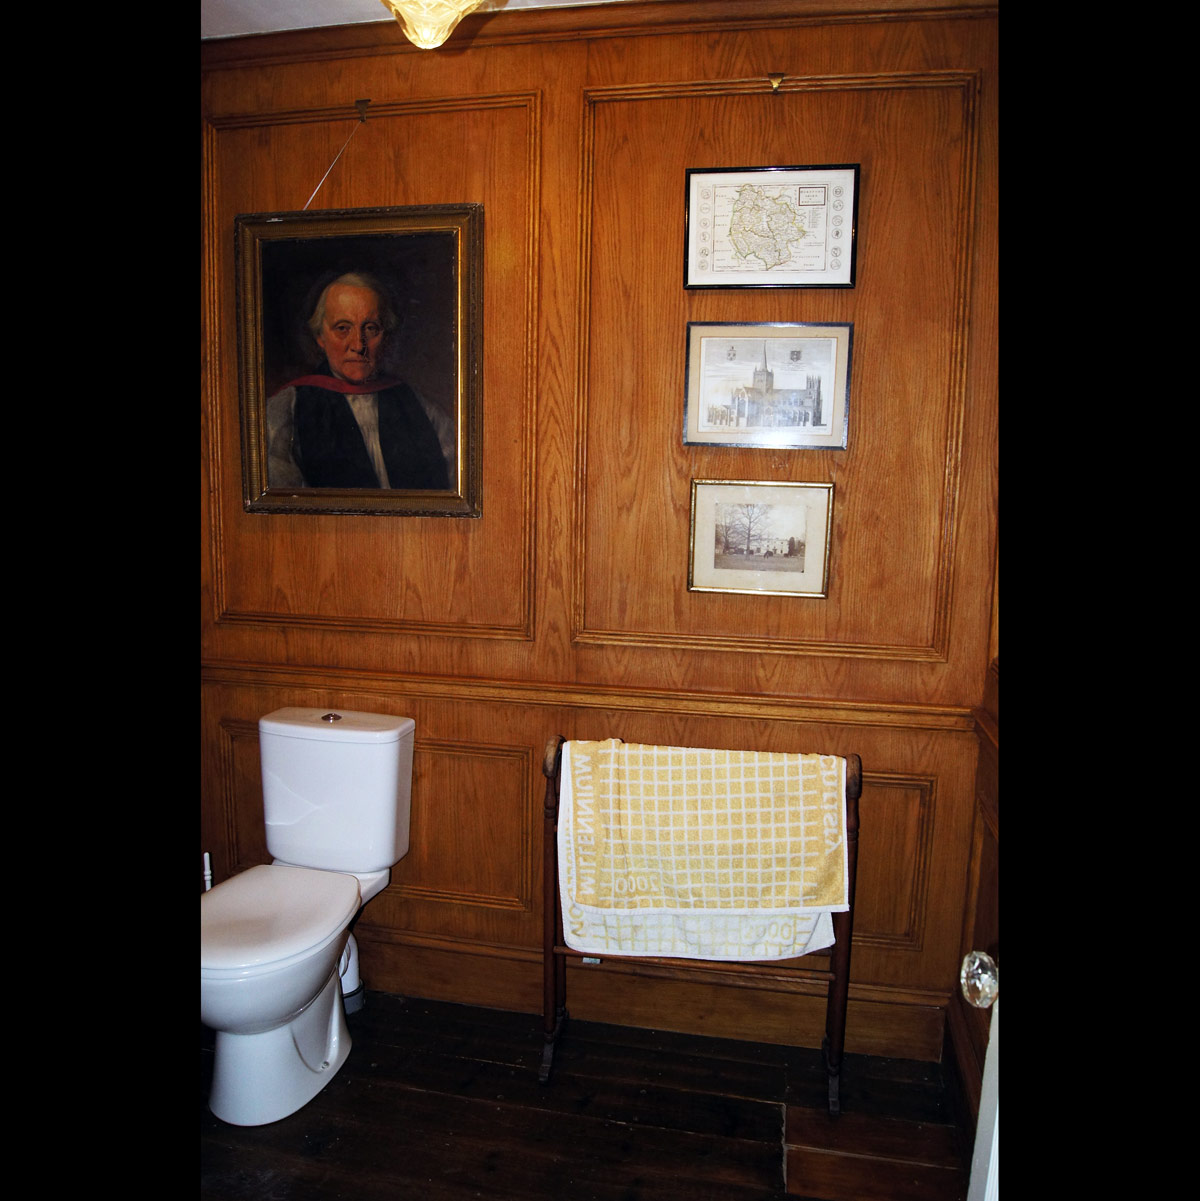 Cloakroom panelling